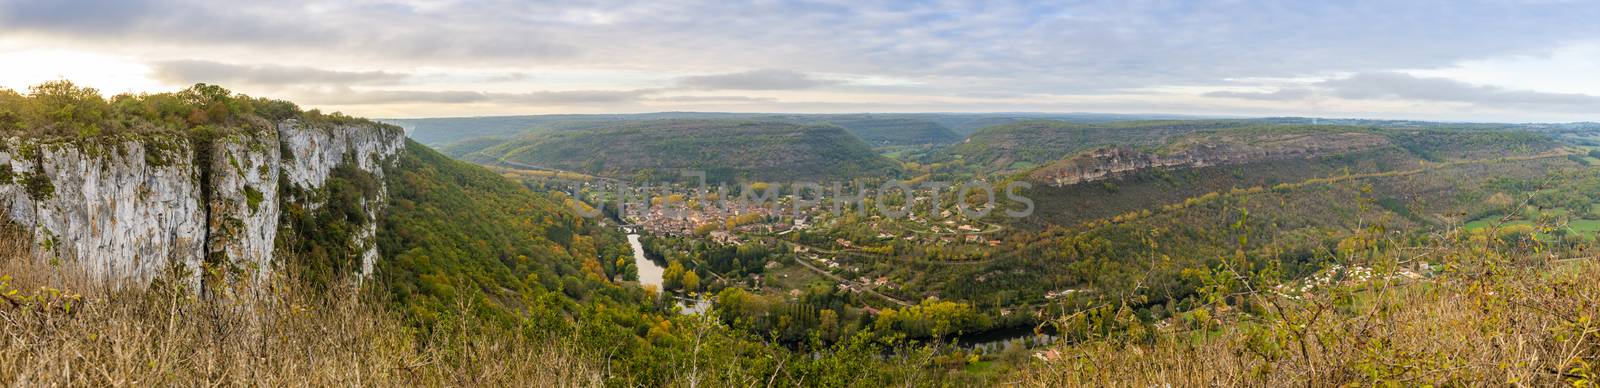 The Aveyron valley at Saint-Antonin-Noble-Val, from the top of the cliff, offers a magnificent and impressive panorama.